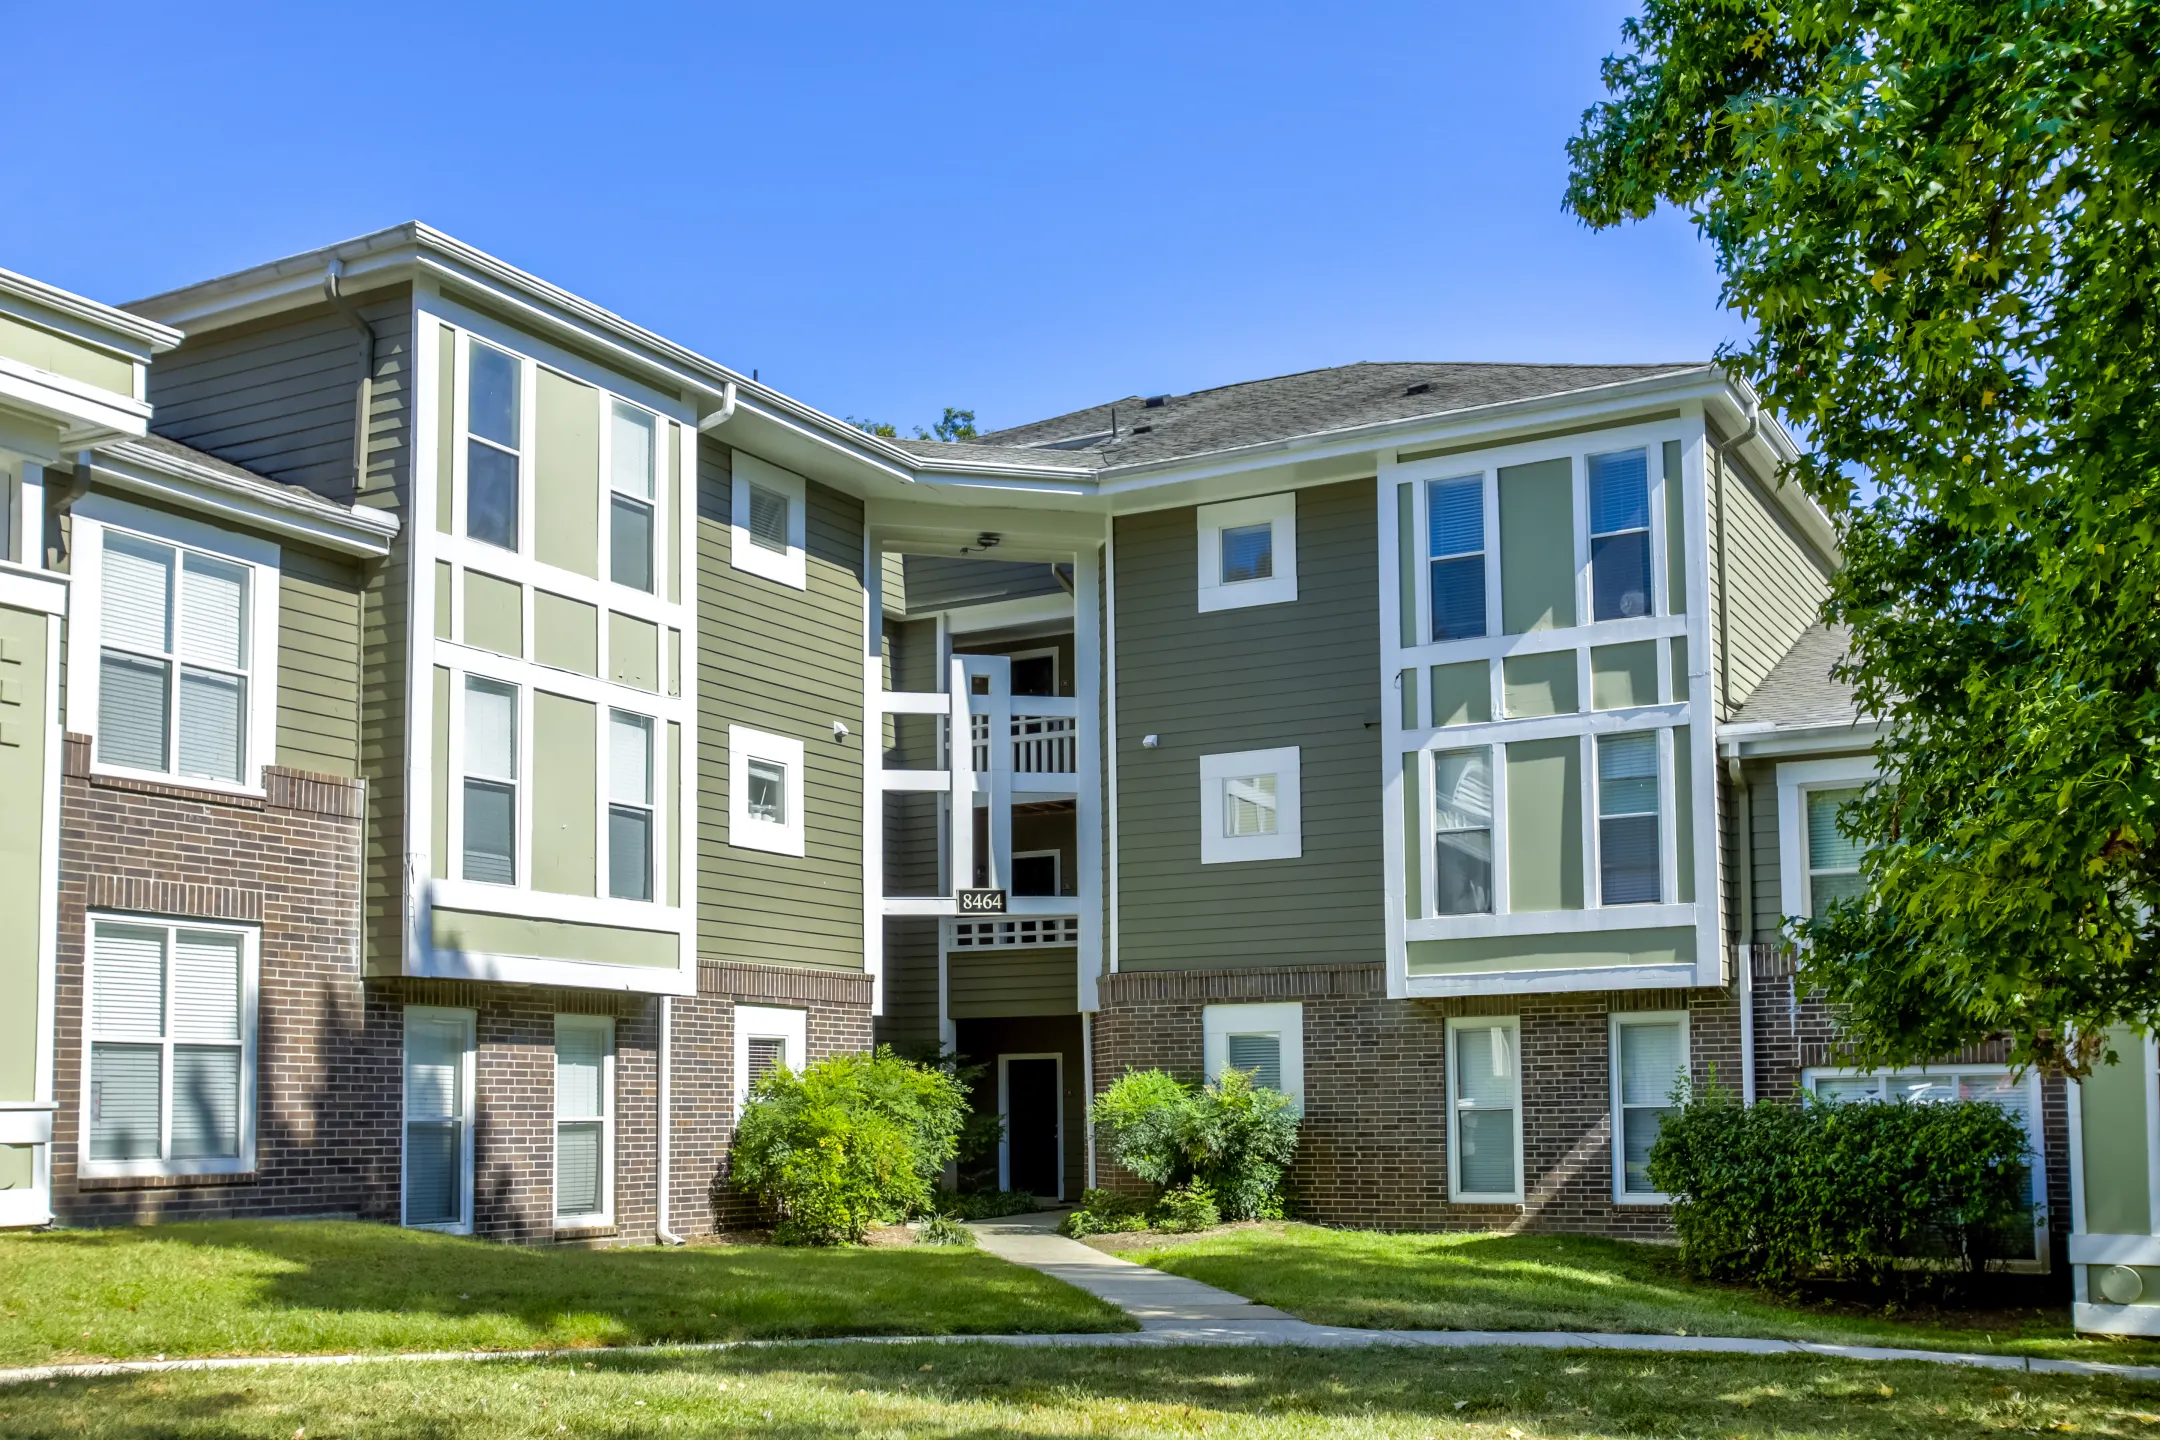 Building - The Apartments at Tamar Meadow - Columbia, MD